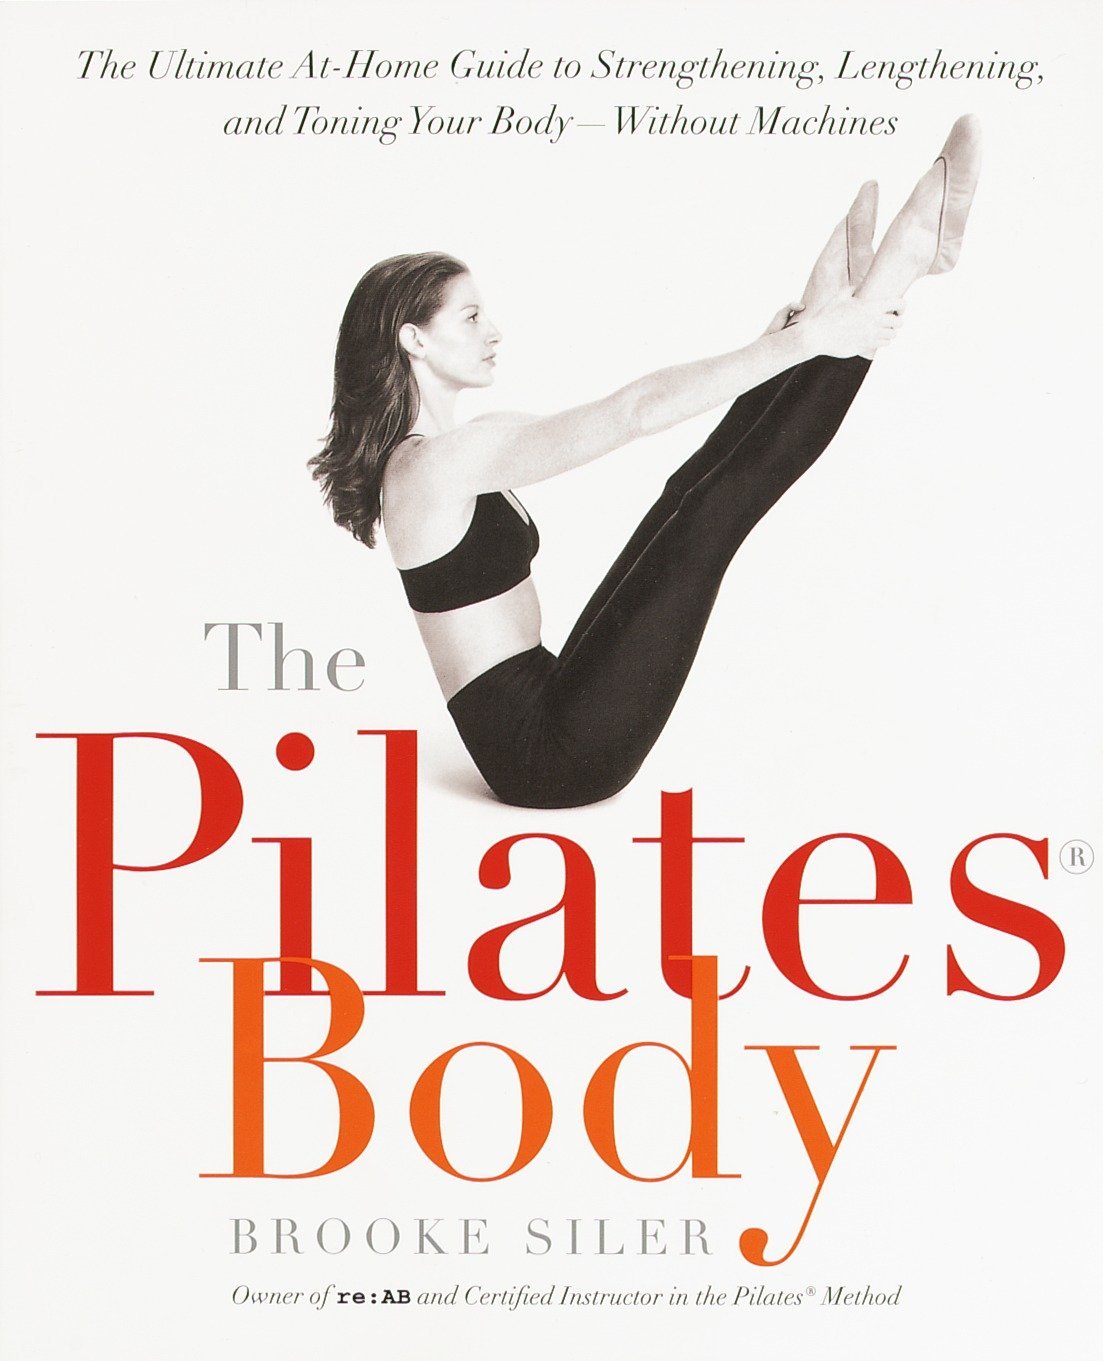 Pilates Body: The Ultimate At-Home Guide to Strengthening, Lengthening, and Toning Your Body--Without Machines